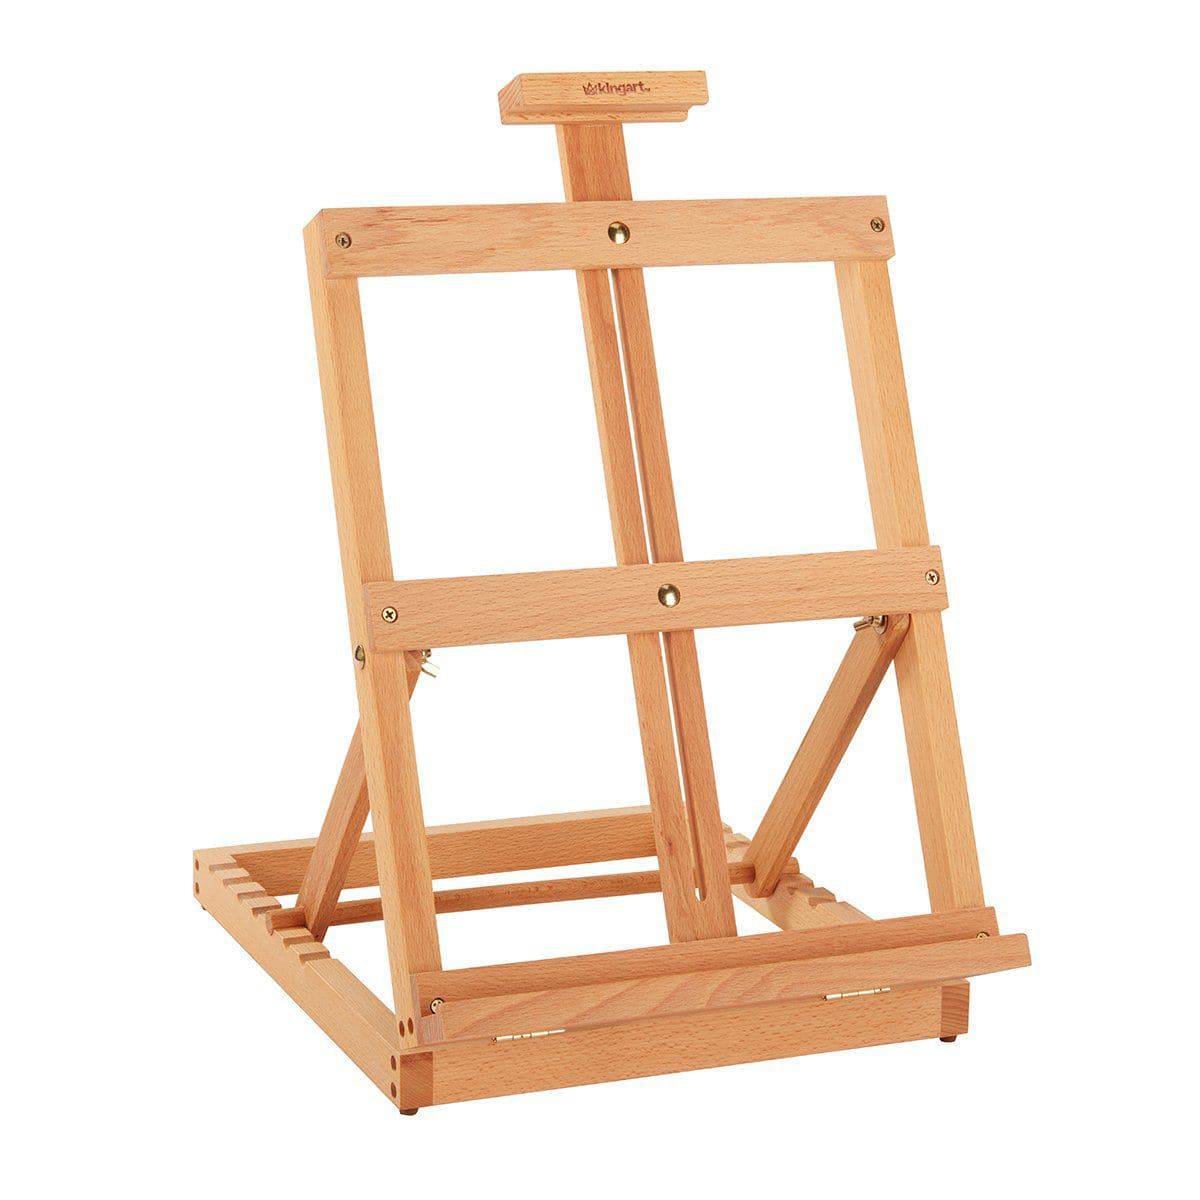 16 Mini Tabletop Wooden H-Frame Studio Easel - Artists Adjustable Painting  and Display Easel, 16” Easel Easel - QFC